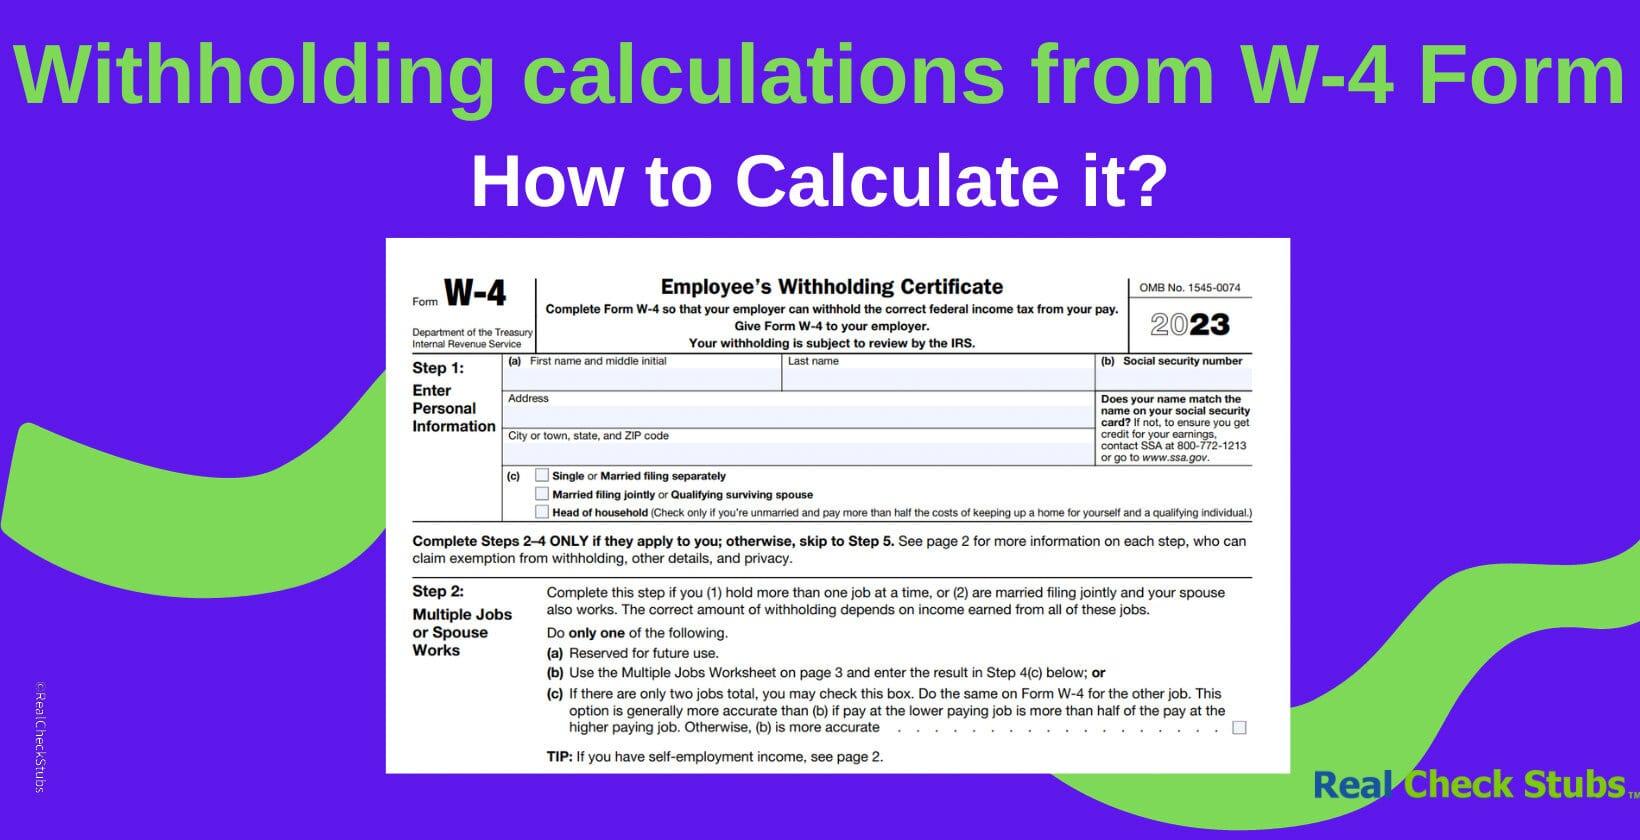 Withholding calculations based on Previous W-4 Form: How to Calculate it?